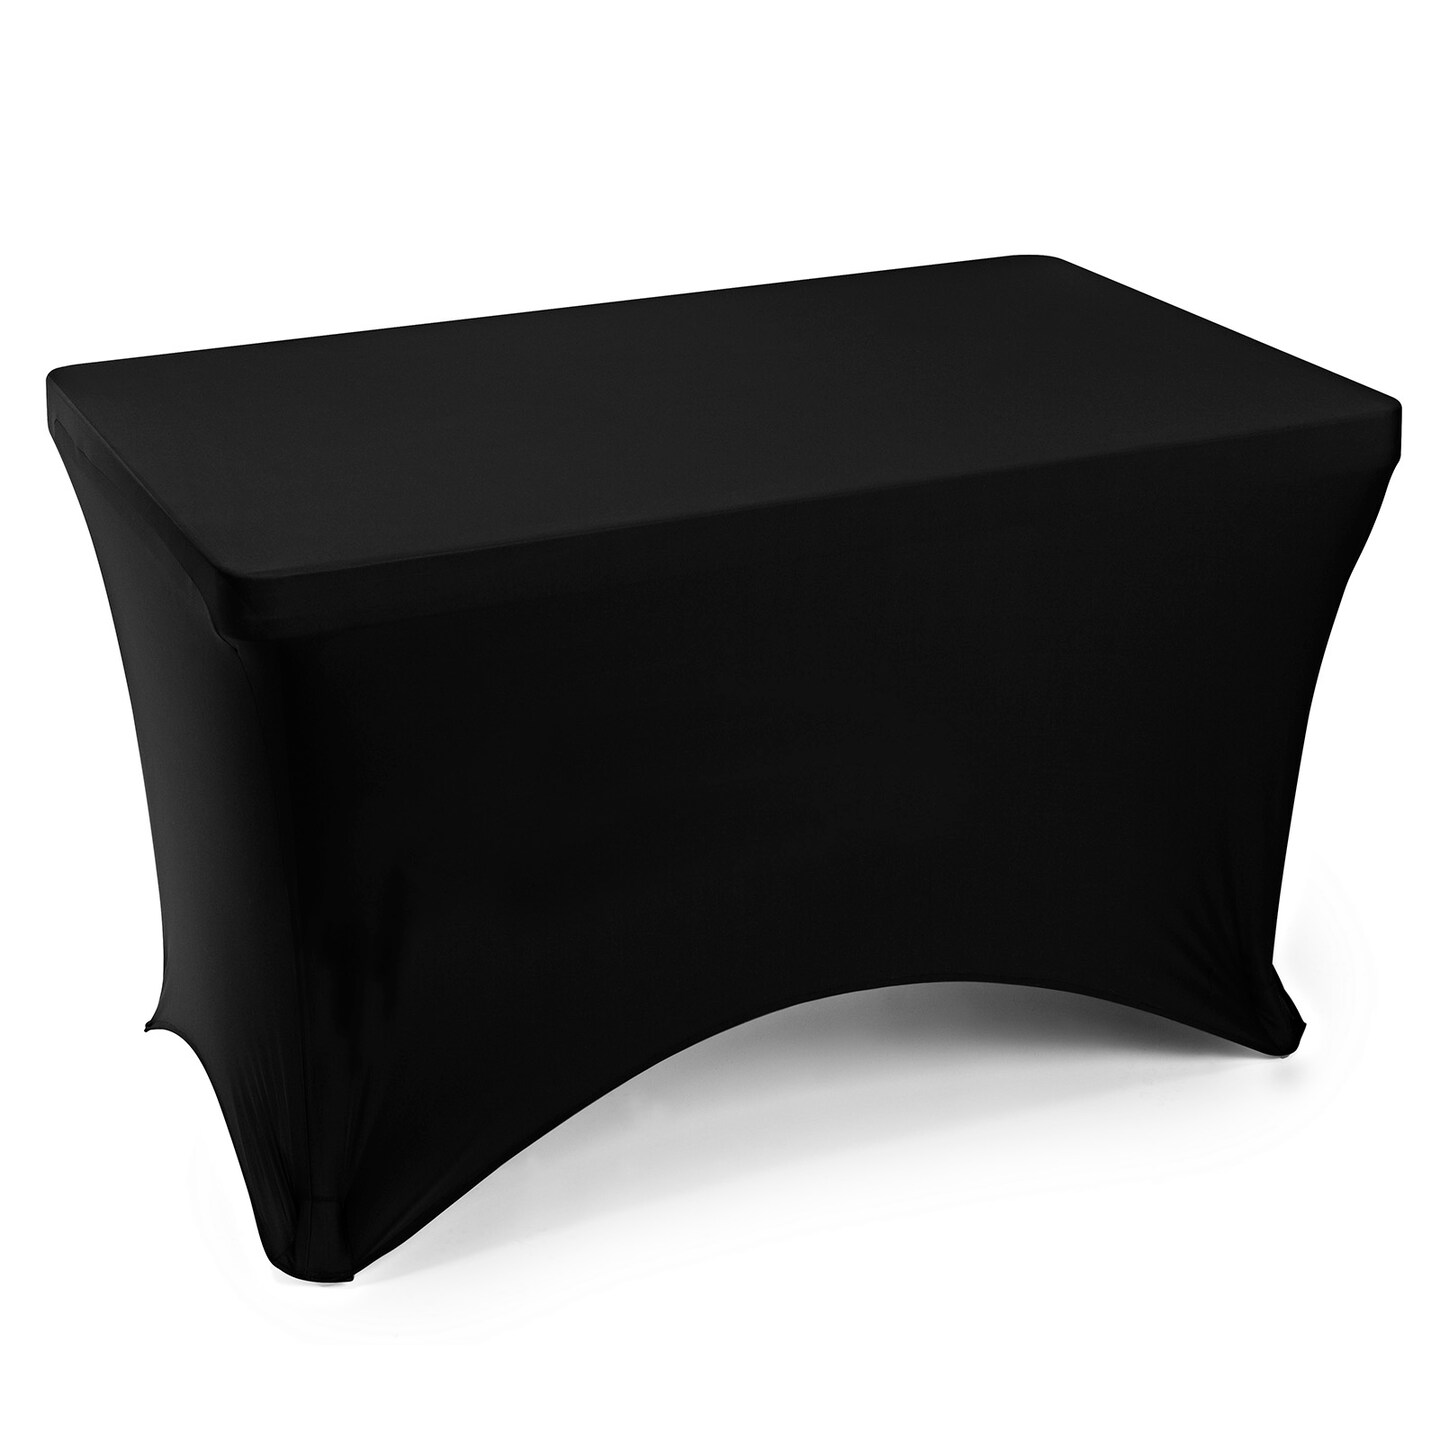 Lann's Linens - Fitted Stretch Tablecloth for Rectangular Table - Wedding / Banquet / Trade Show - Spandex Cloth Fabric Cover